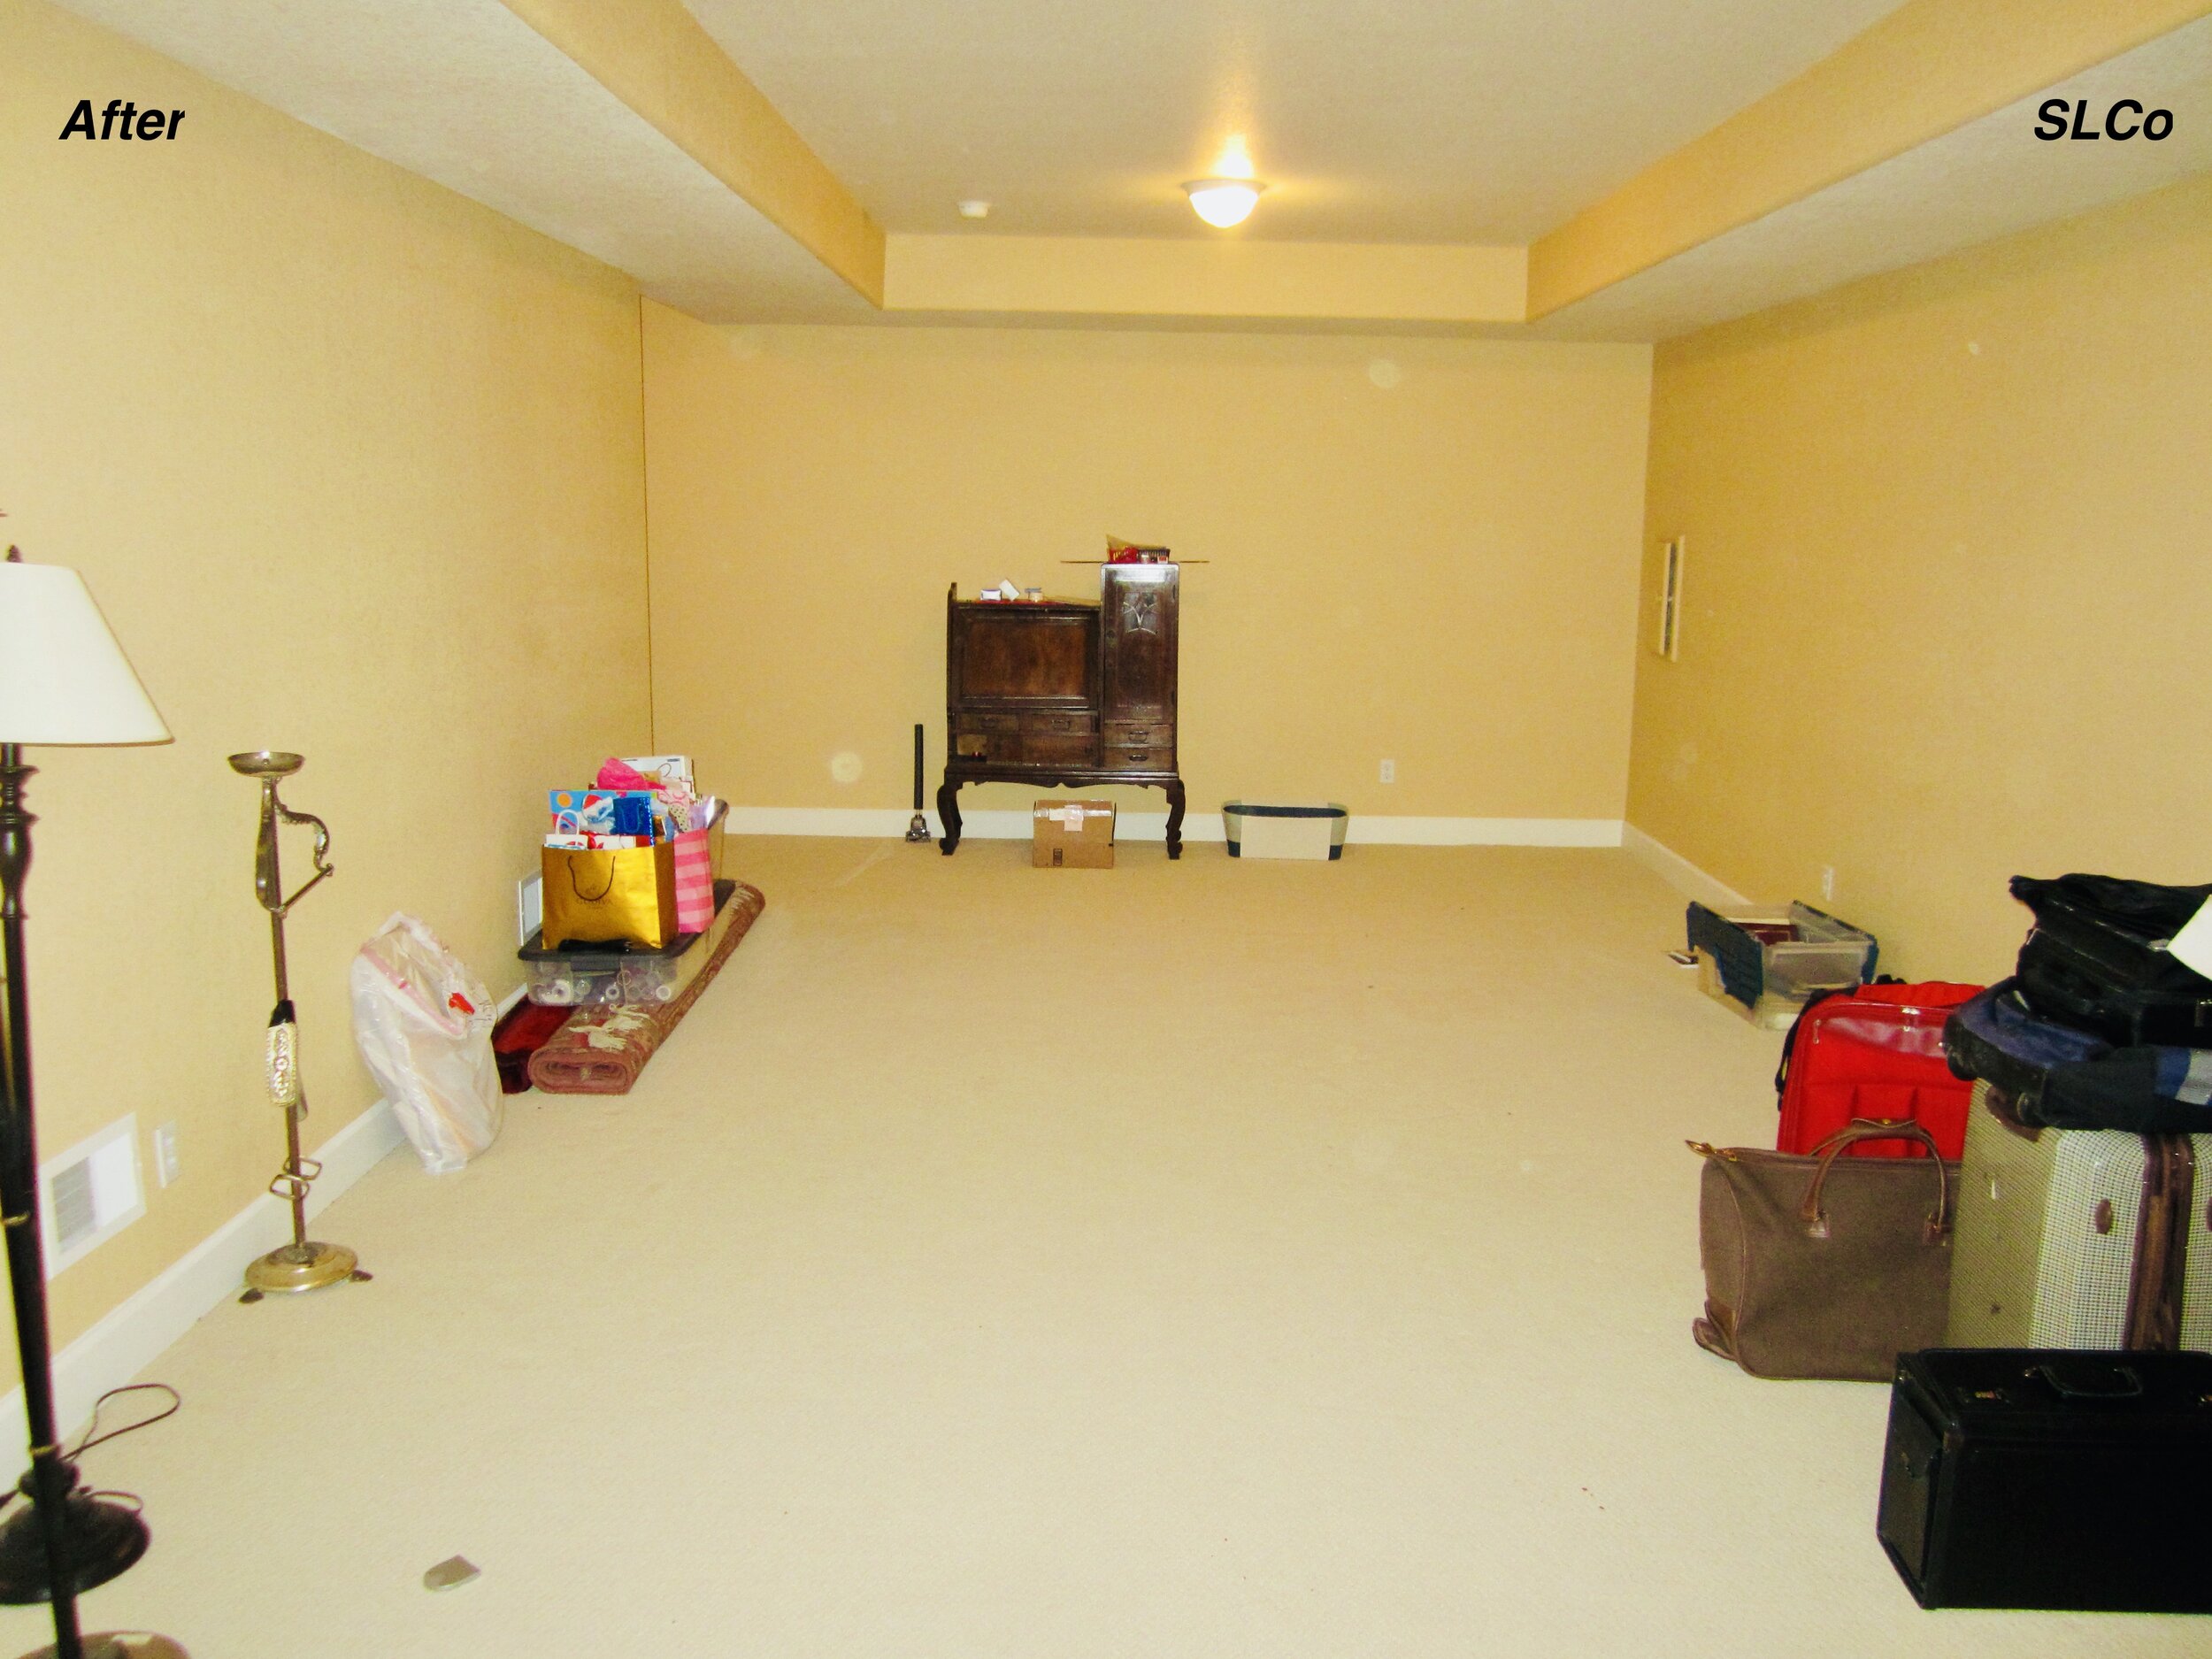 After photo of large basement with boxes and containers clear, some luggage against wall, and floor clear.